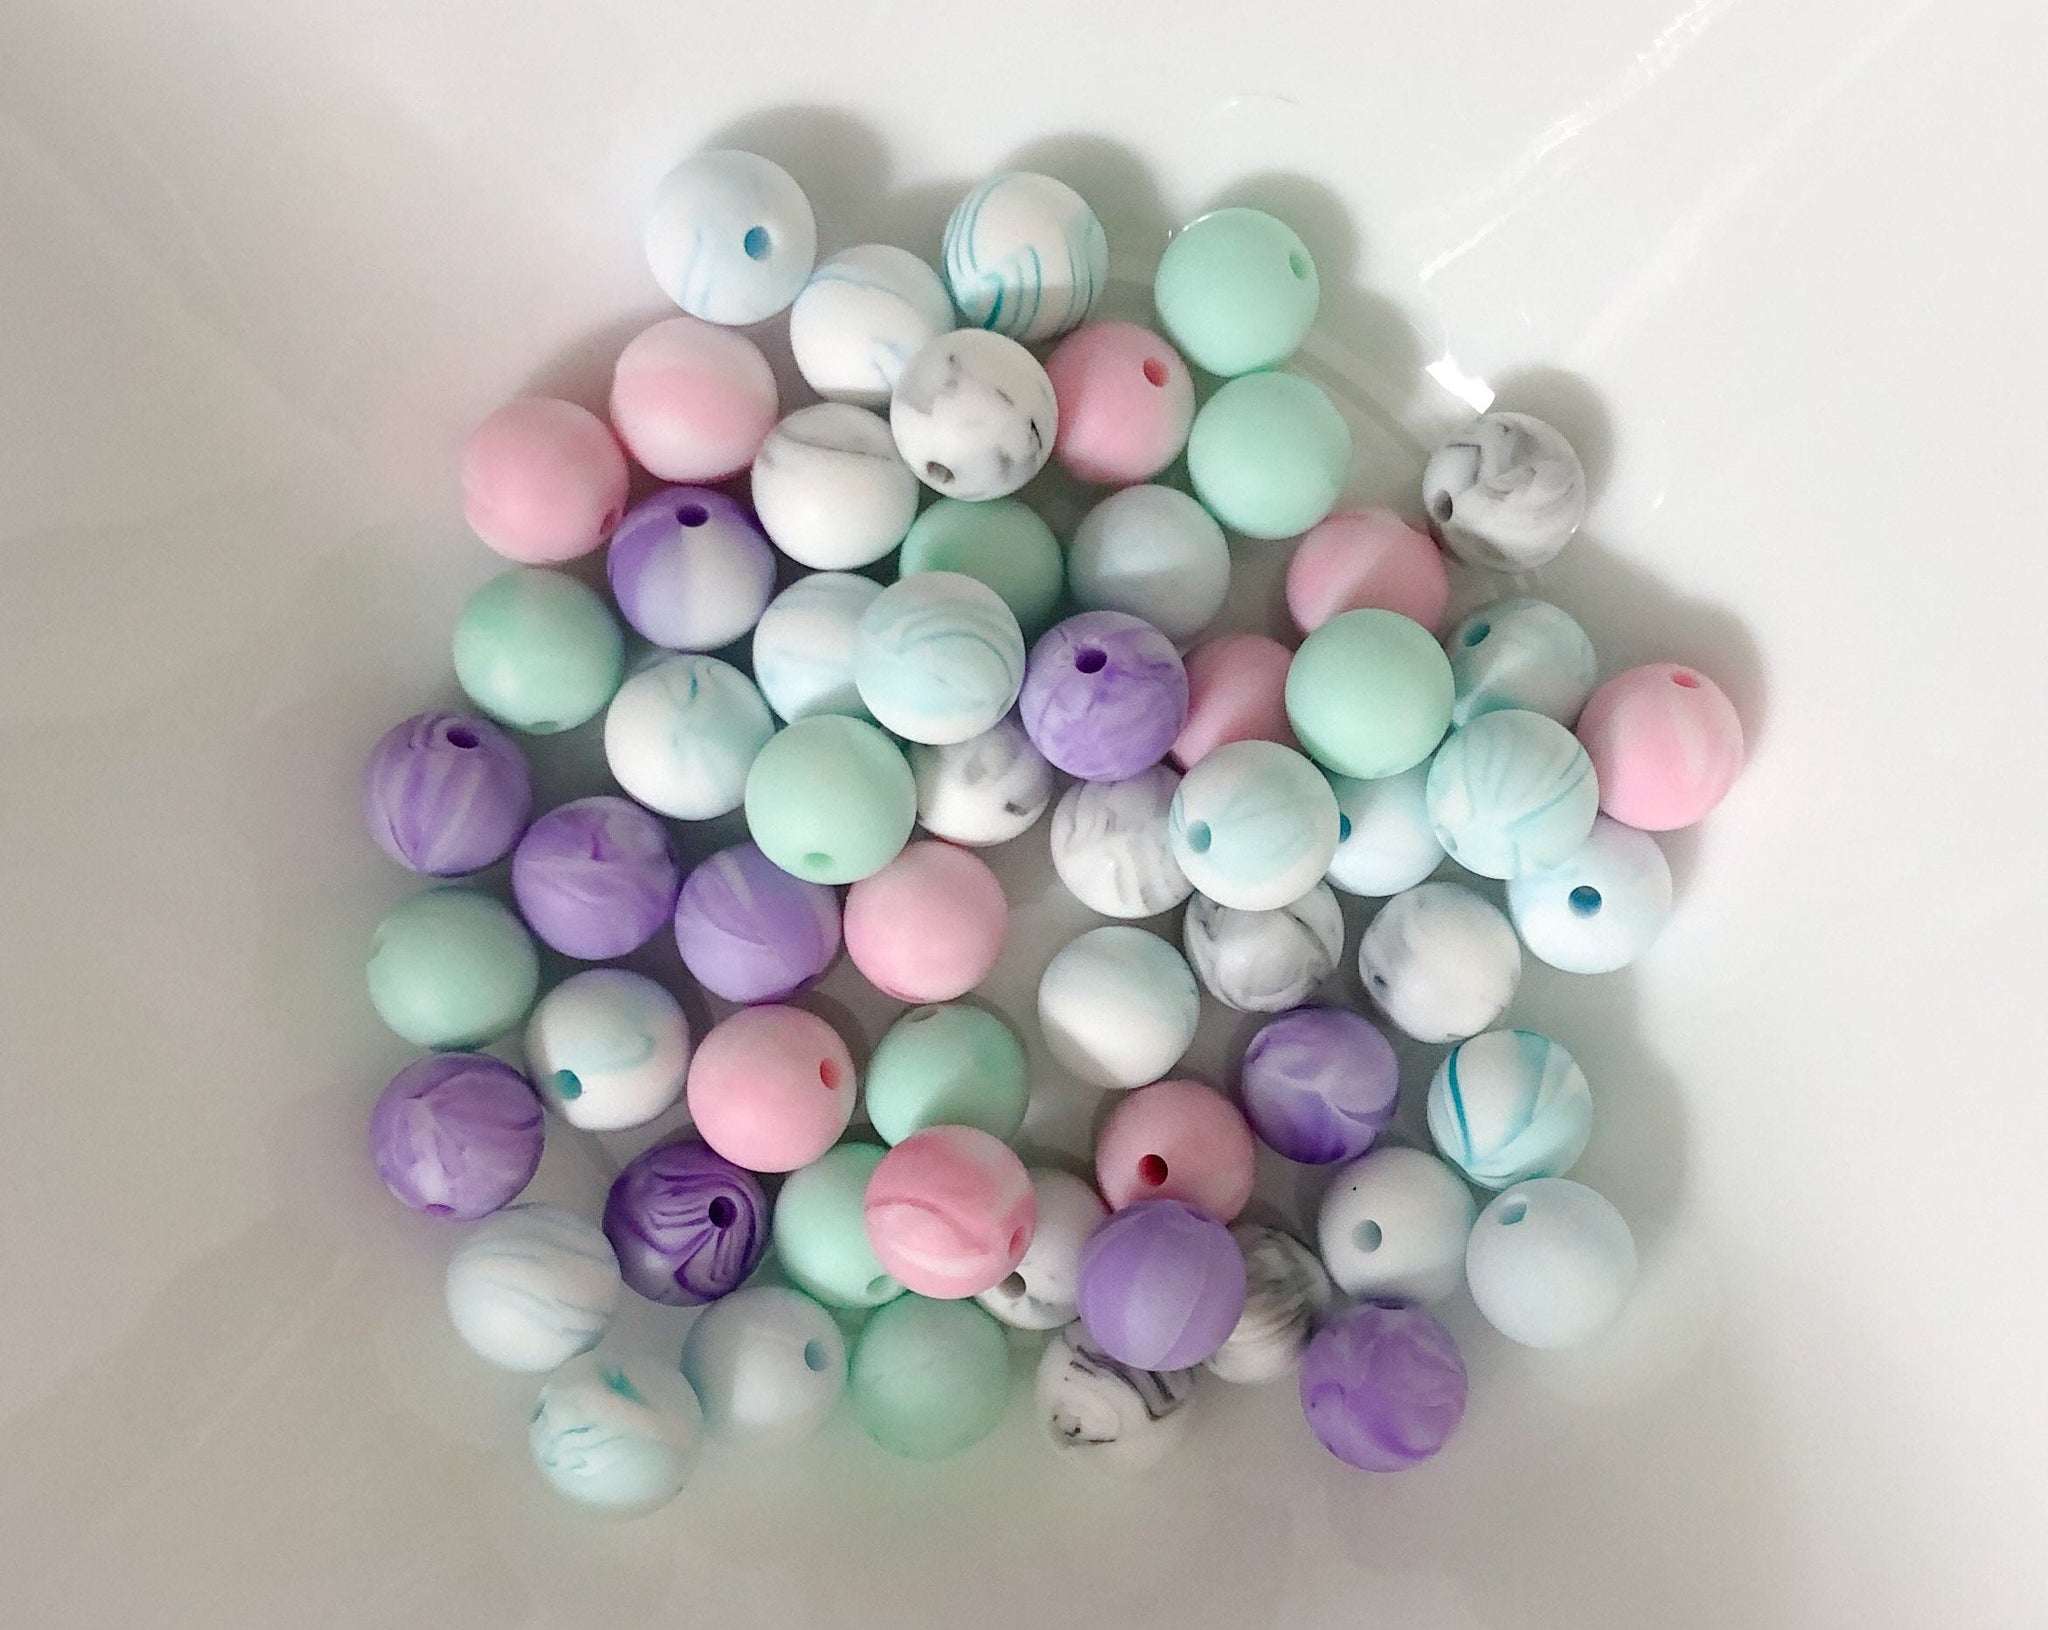 60 Bulk Silicone Beads - Marble Mix - Pink, Mint, Teal, Blue